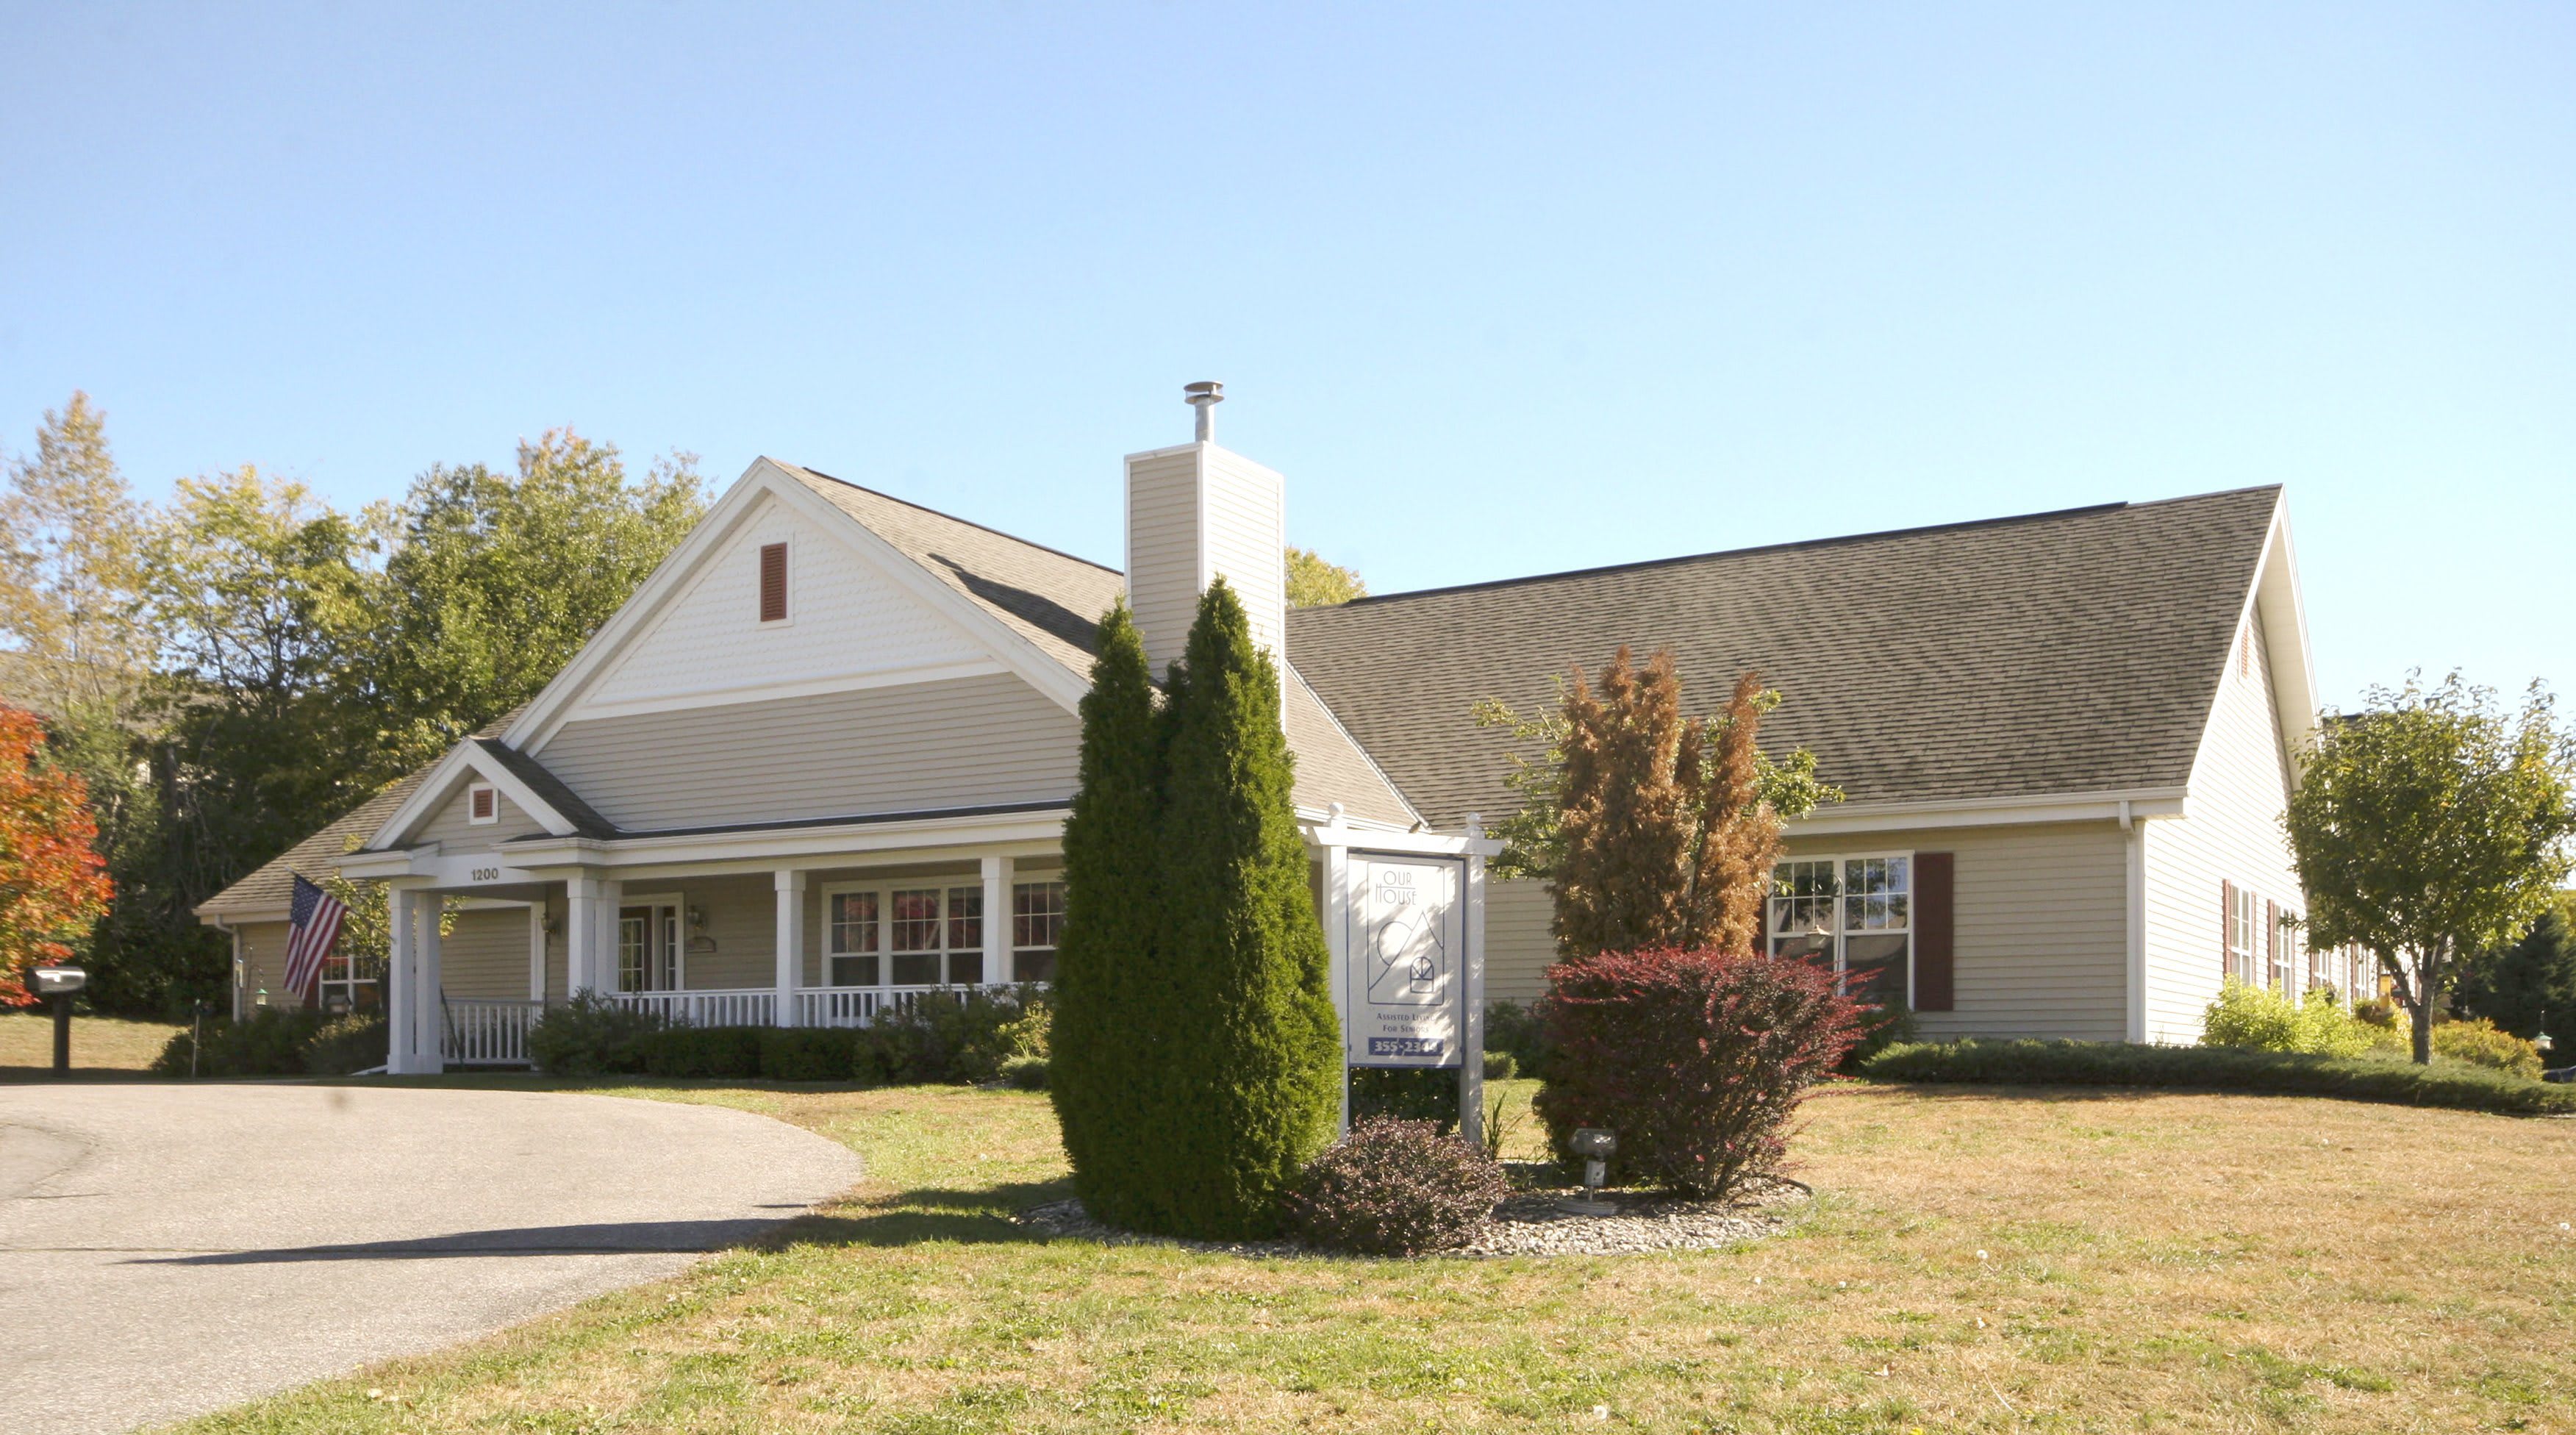 Photo of Our House Senior Living Assisted Care - Baraboo